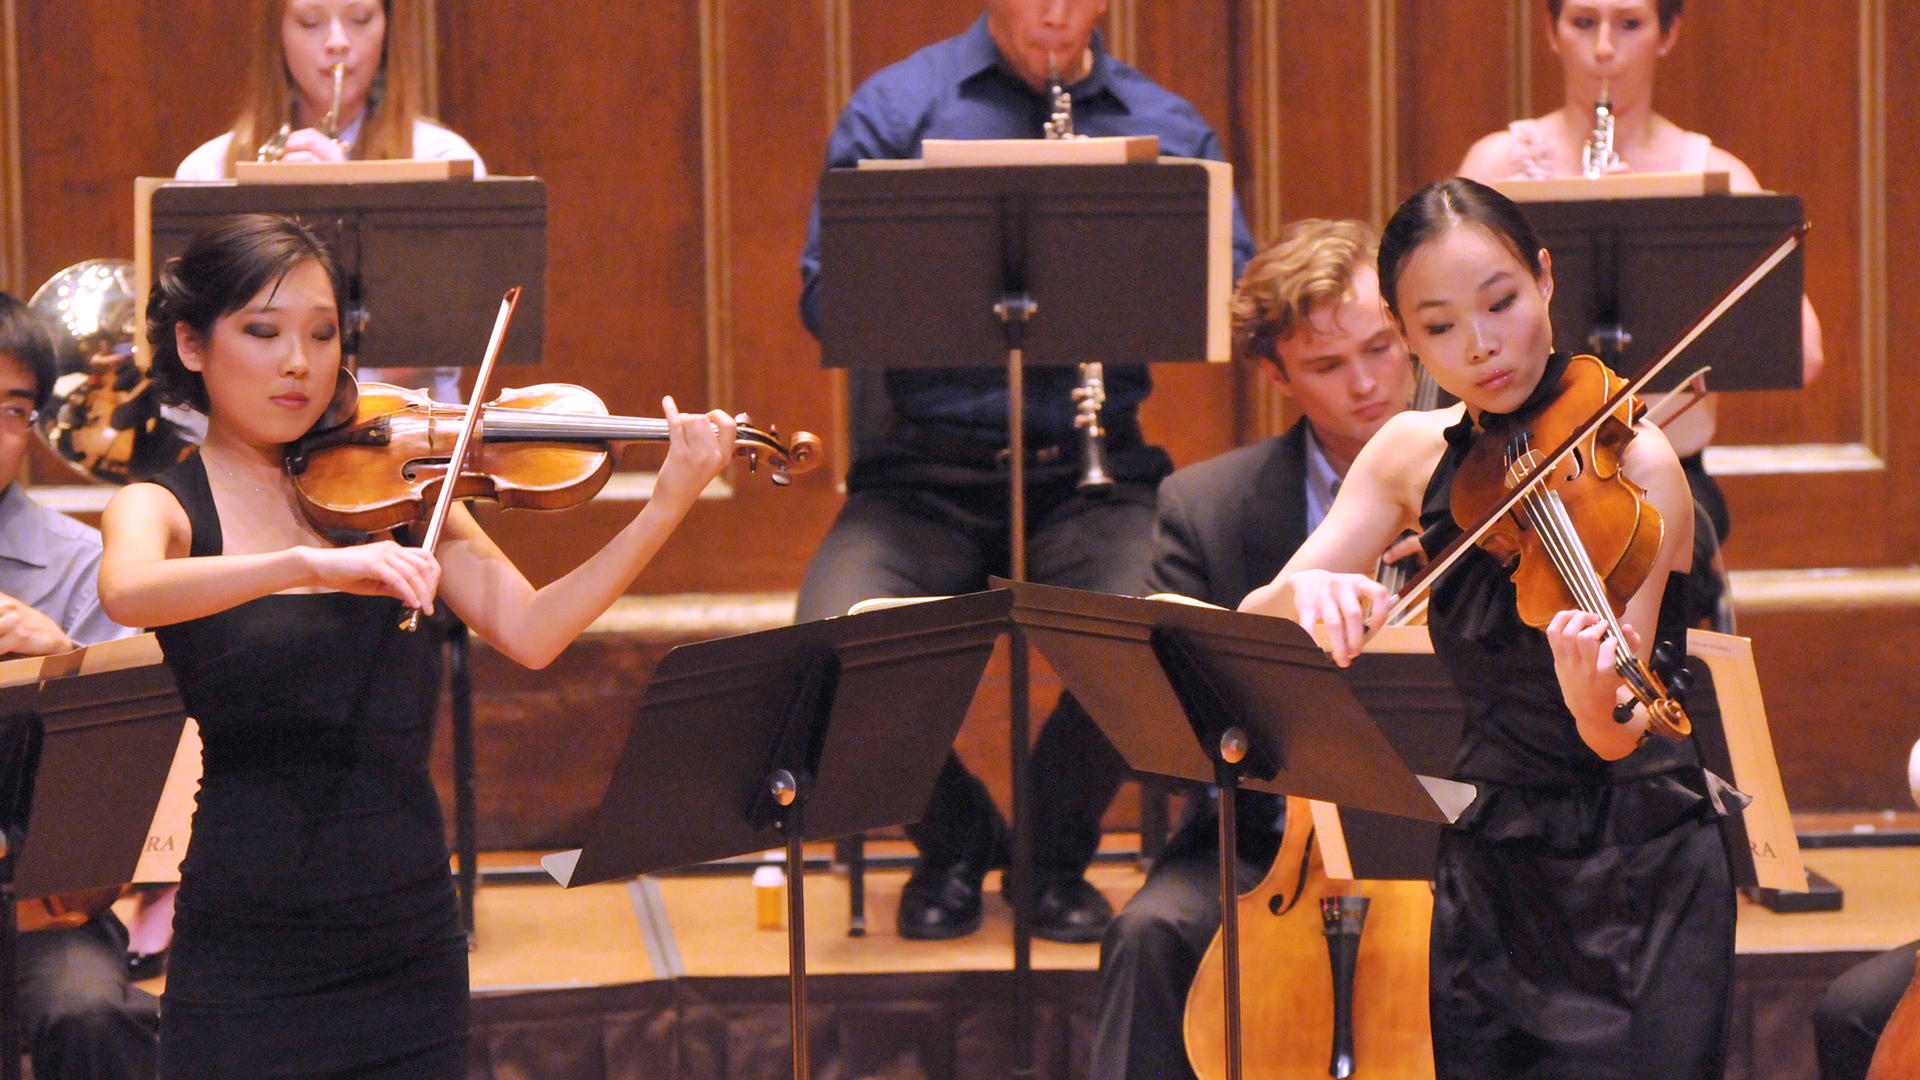 Grace Park and Wenting Kang perform Mozart's Sinfonia Concertante